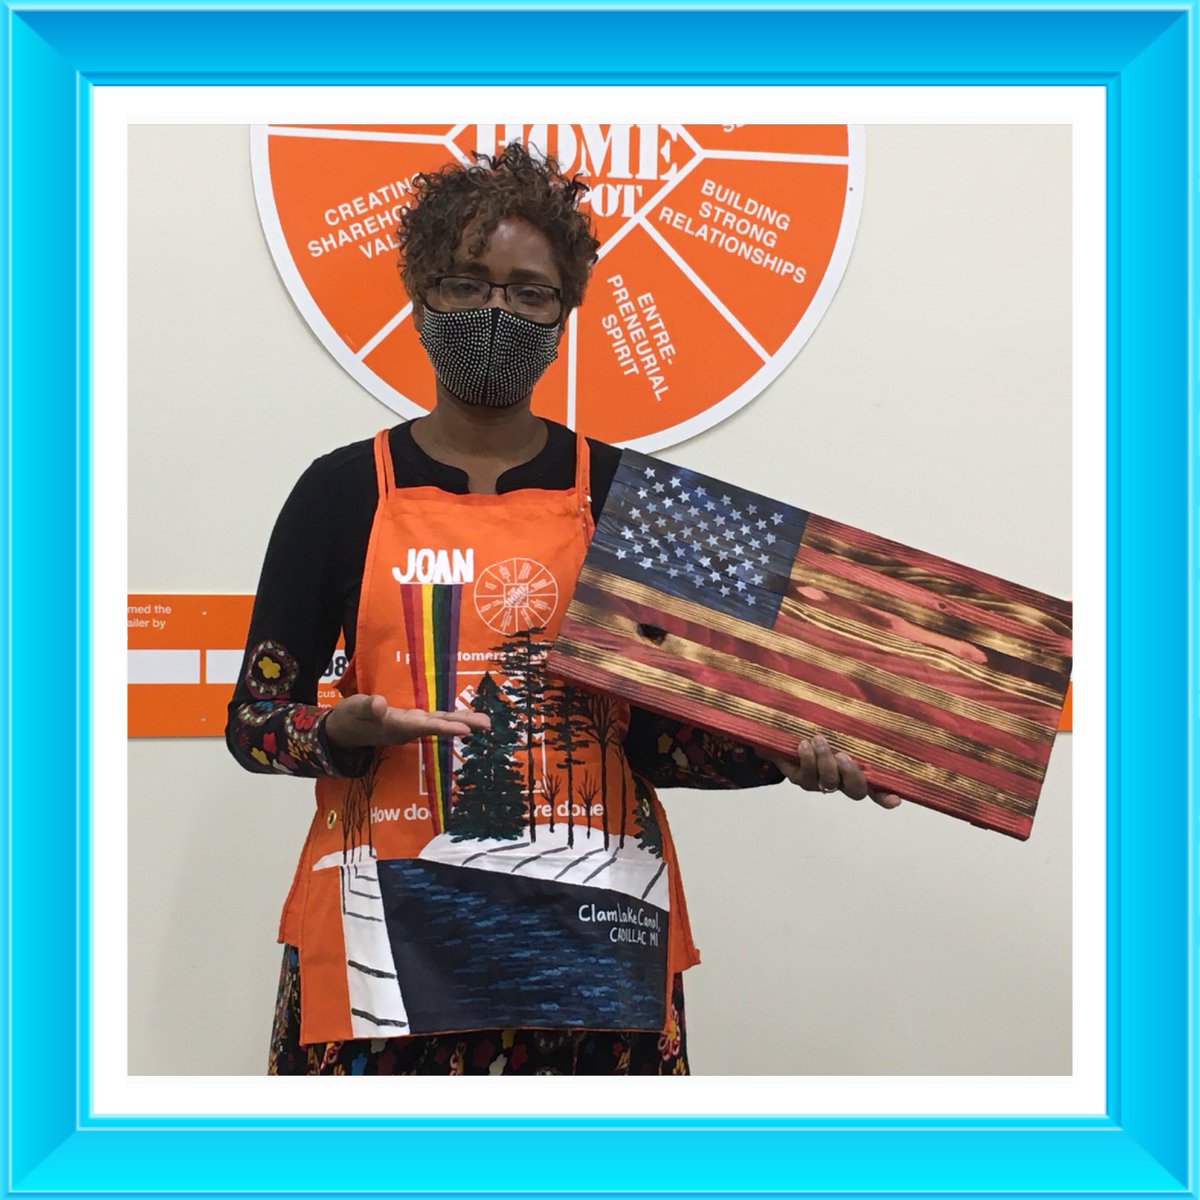 It was an honor to meet and walk with our new District HR Joan Carlton! Joan was presented with a Cadillac Themed HD apron and a wooden American flag as a welcome to our Family! We look forward to working with you.